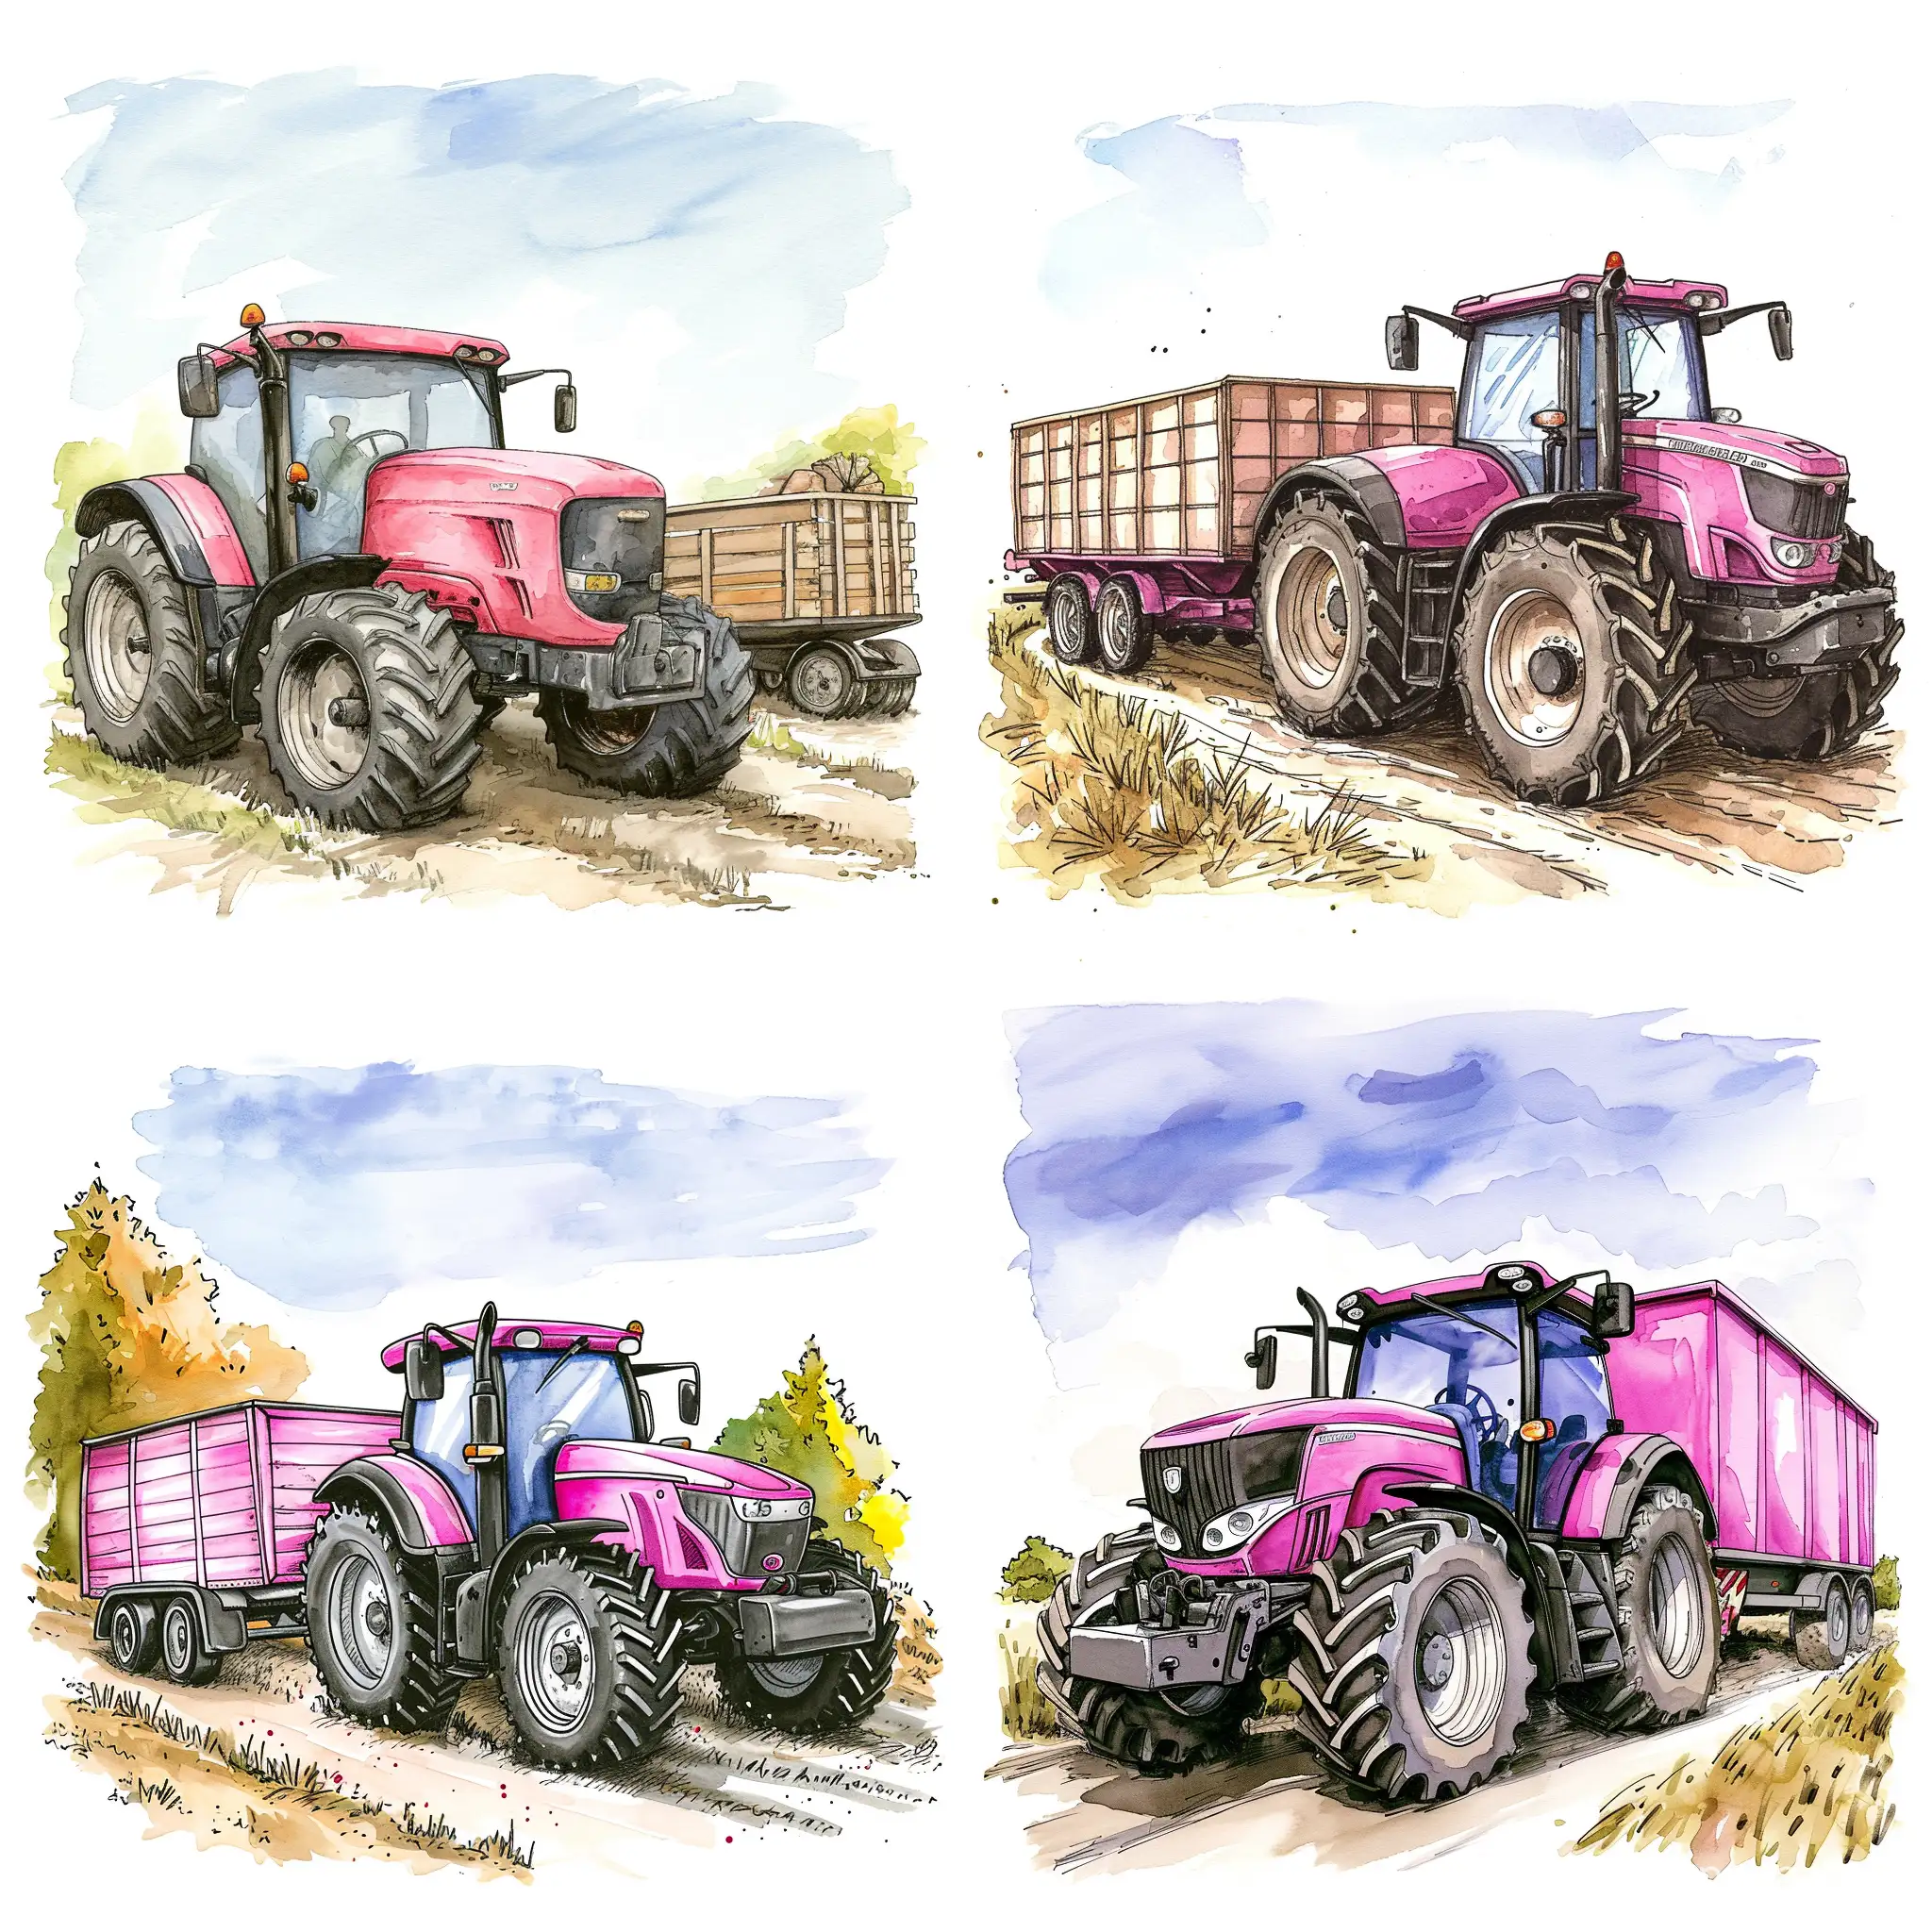 ChildDrawn-Watercolor-Illustration-Pink-Tractor-with-Farm-Theme